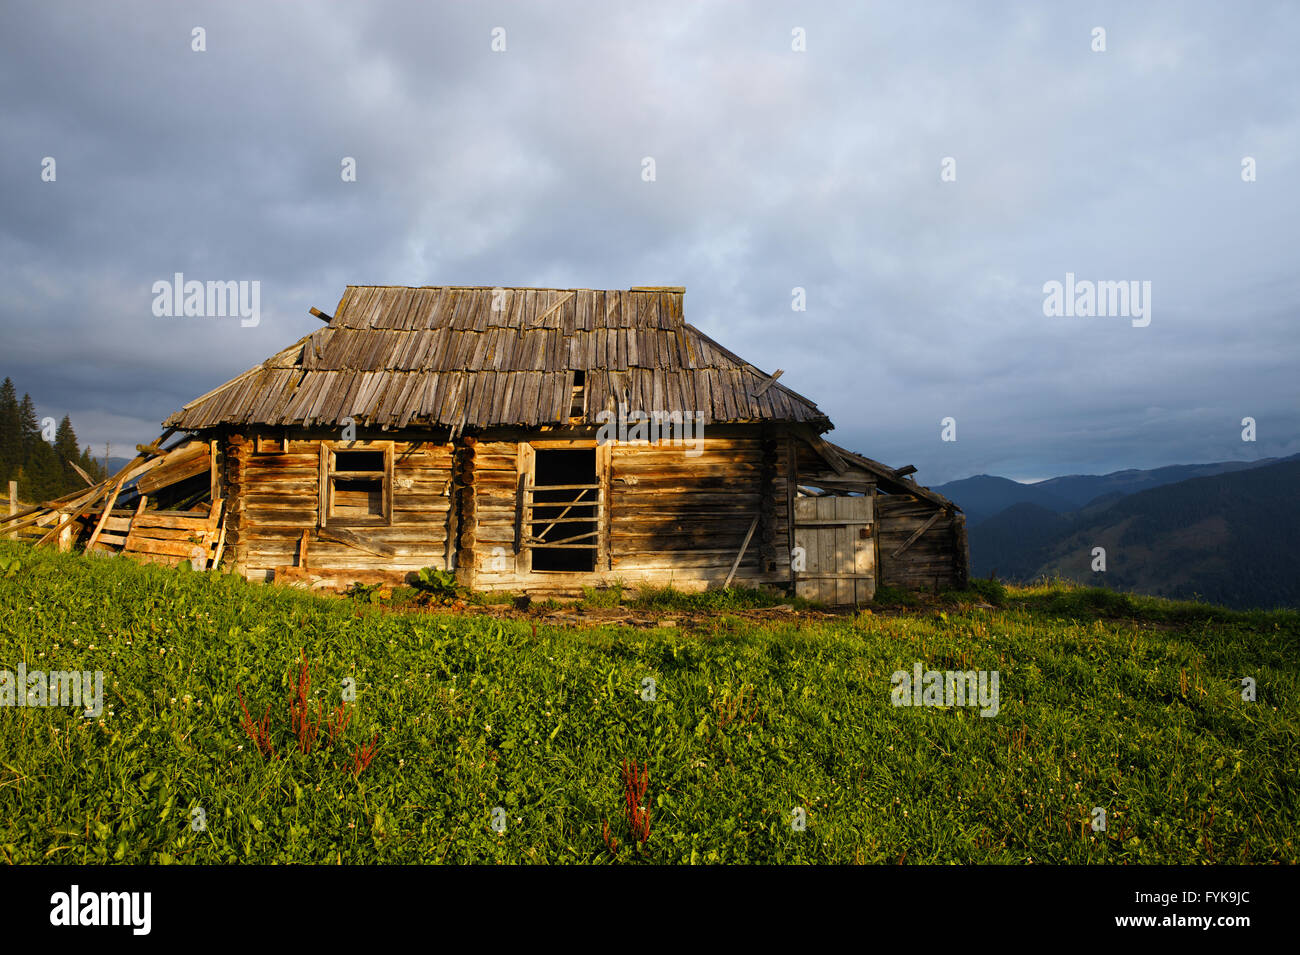 Abandoned wooden house at mountain hill Stock Photo